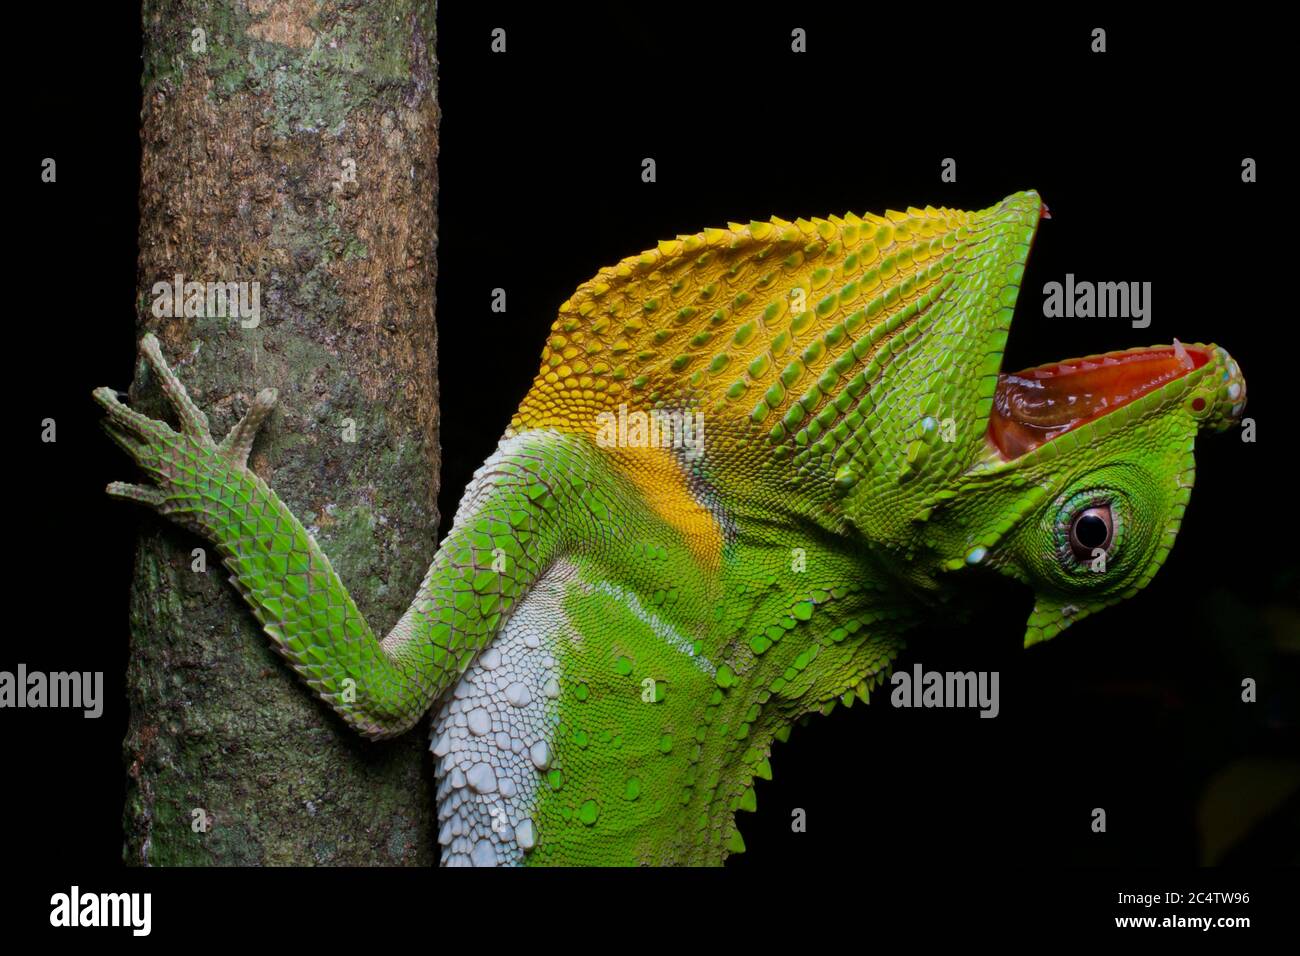 A Hump-nosed Lizard (Lyriocephalus scutatus) clinging to a branch at night in Sri Lanka, with mouth open and dewlap extended. Stock Photo